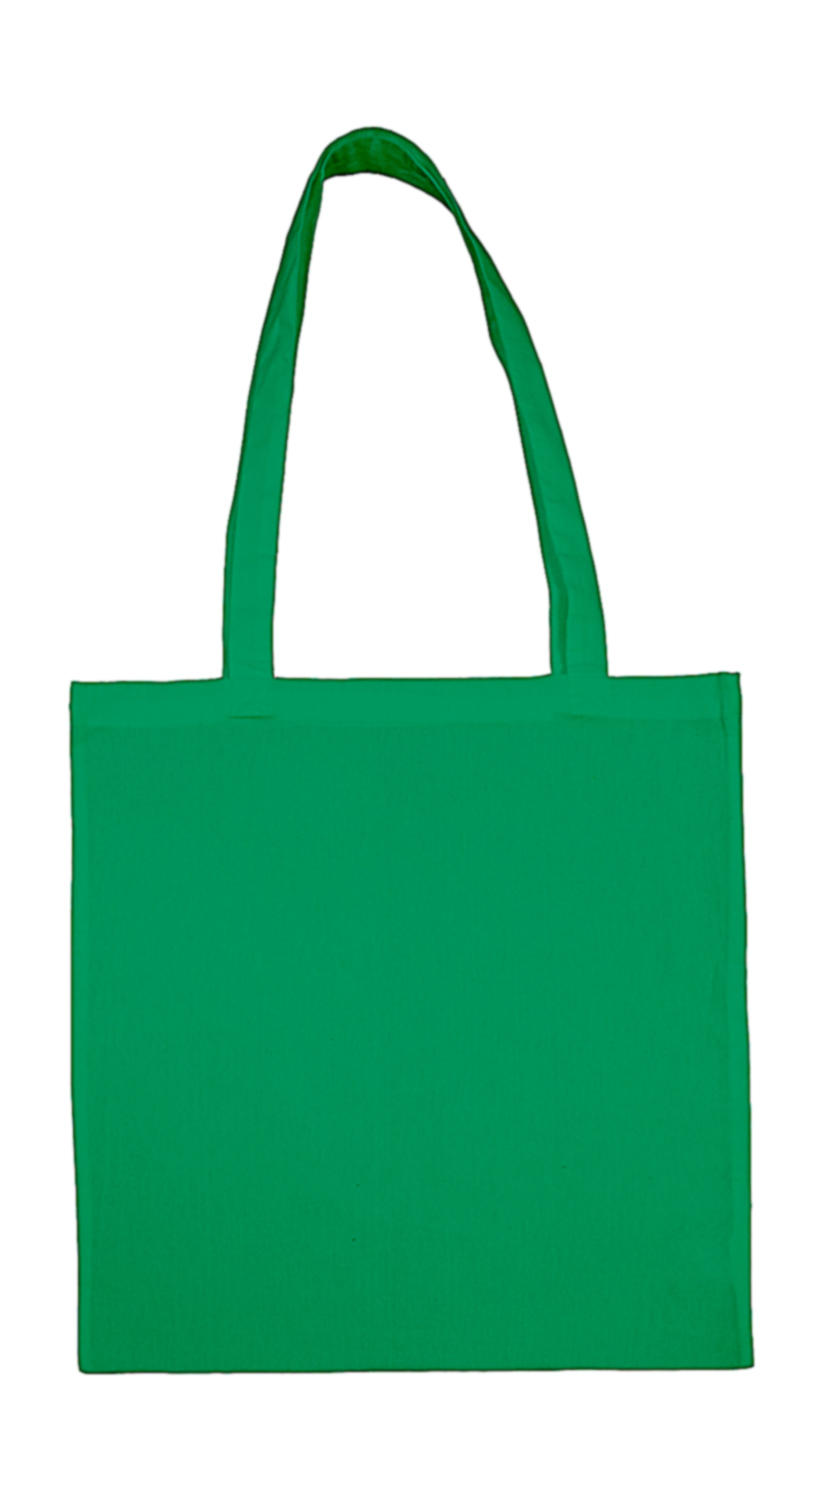  Cotton Bag LH in Farbe Mint